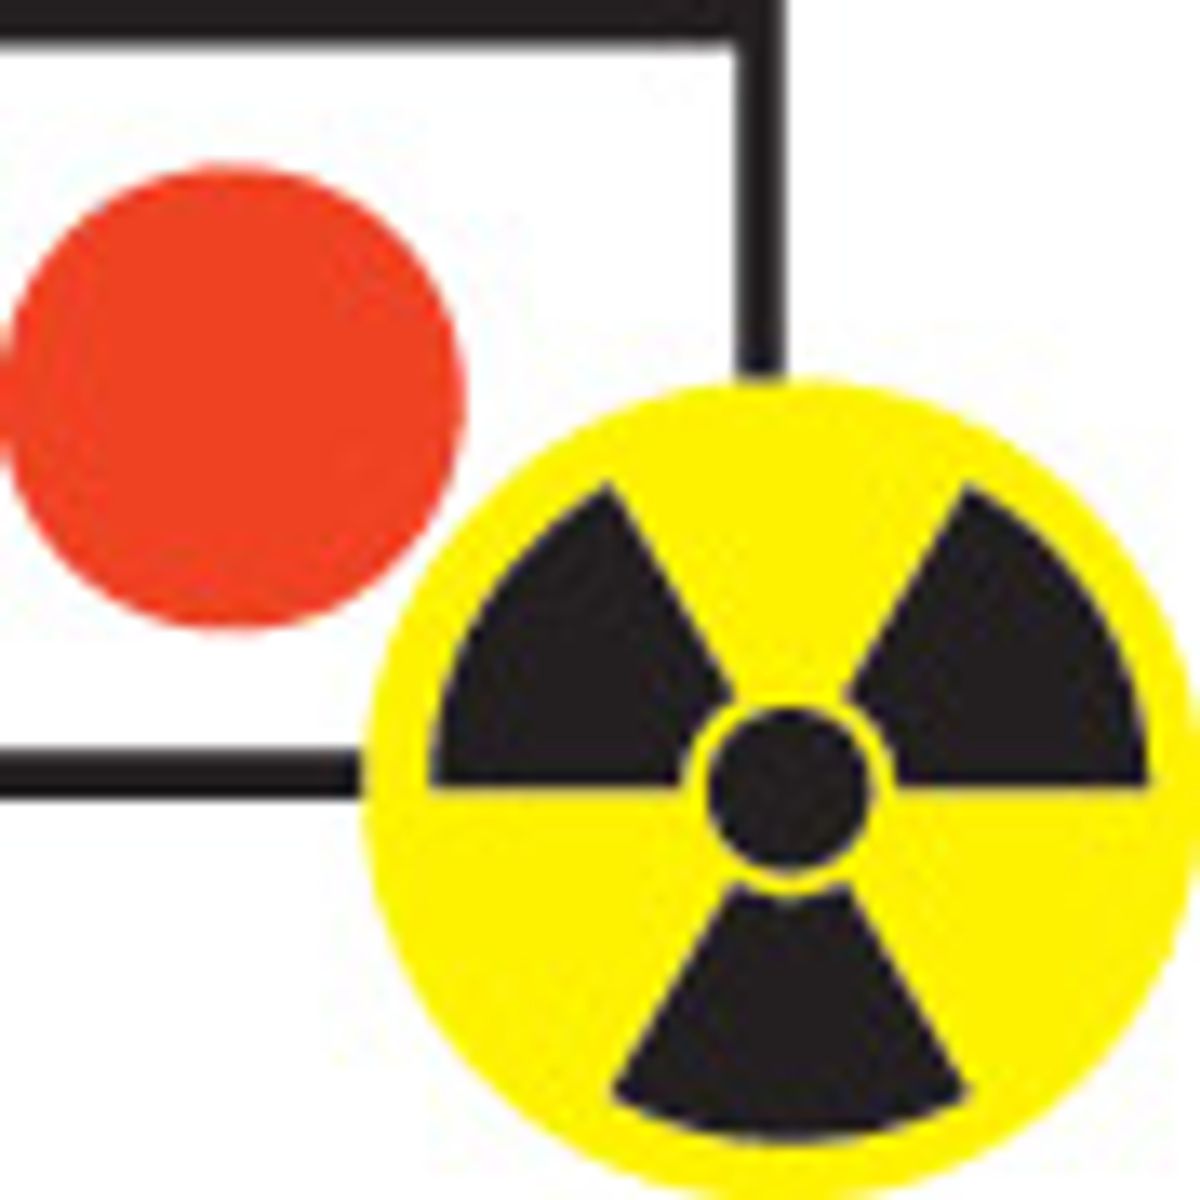 Japan’s Last Nuclear Reactor to Go Off-line